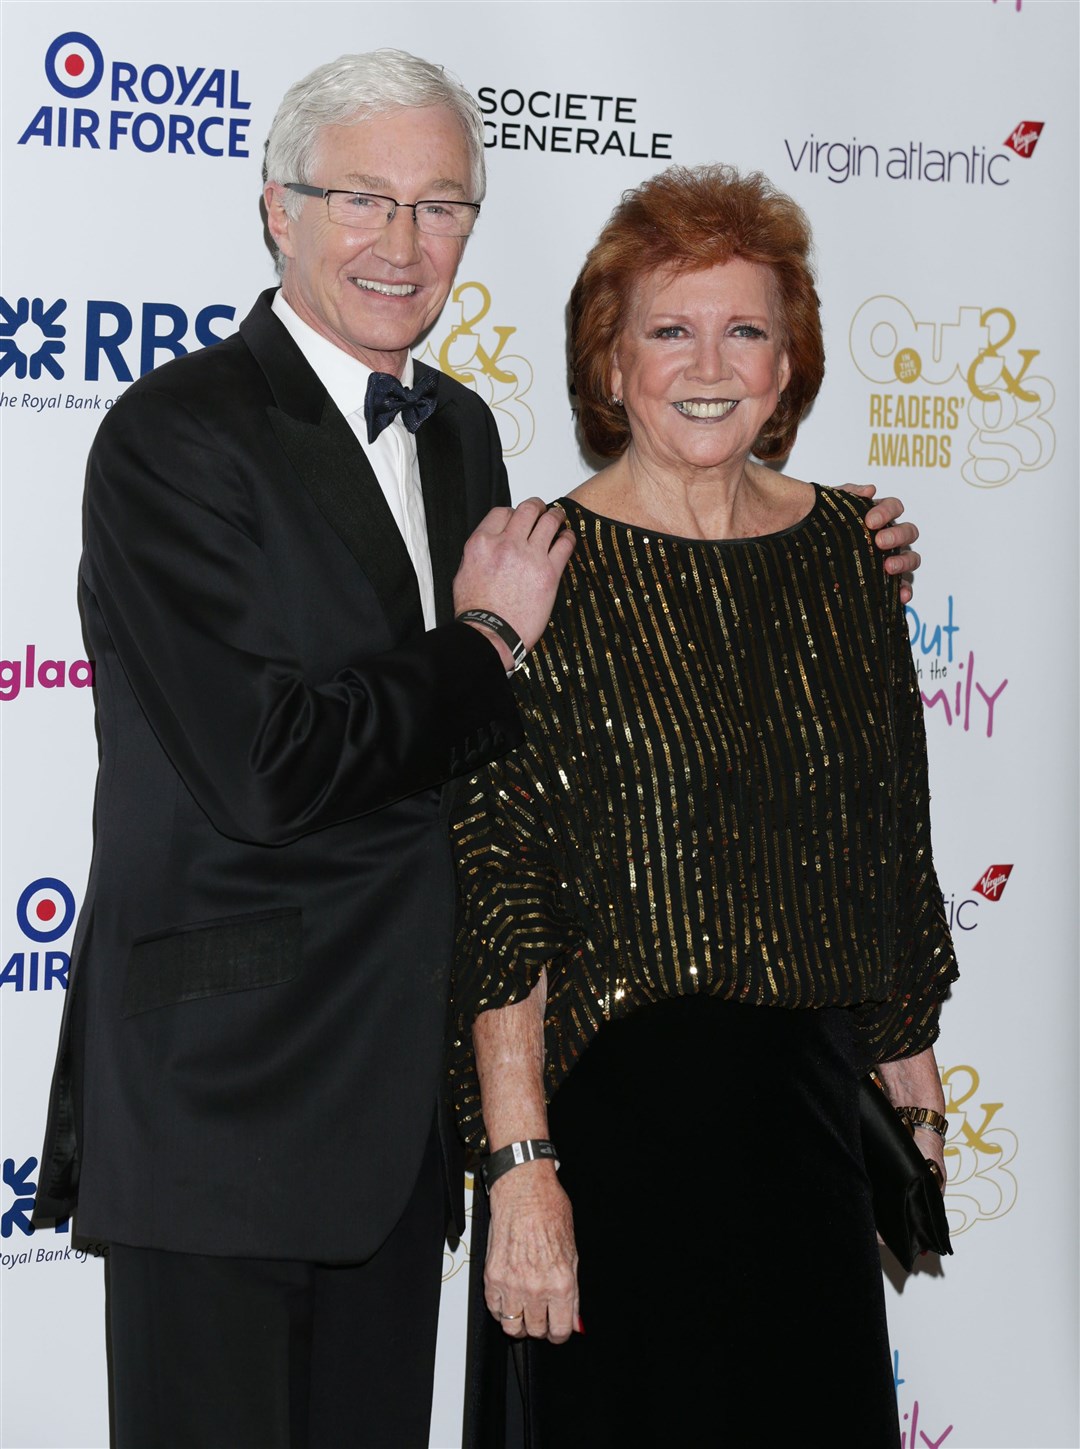 O’Grady took over the reins from Blind Date’s long-running presenter and his close friend Cilla Black, who died in 2015, in a reboot of the show (PA)